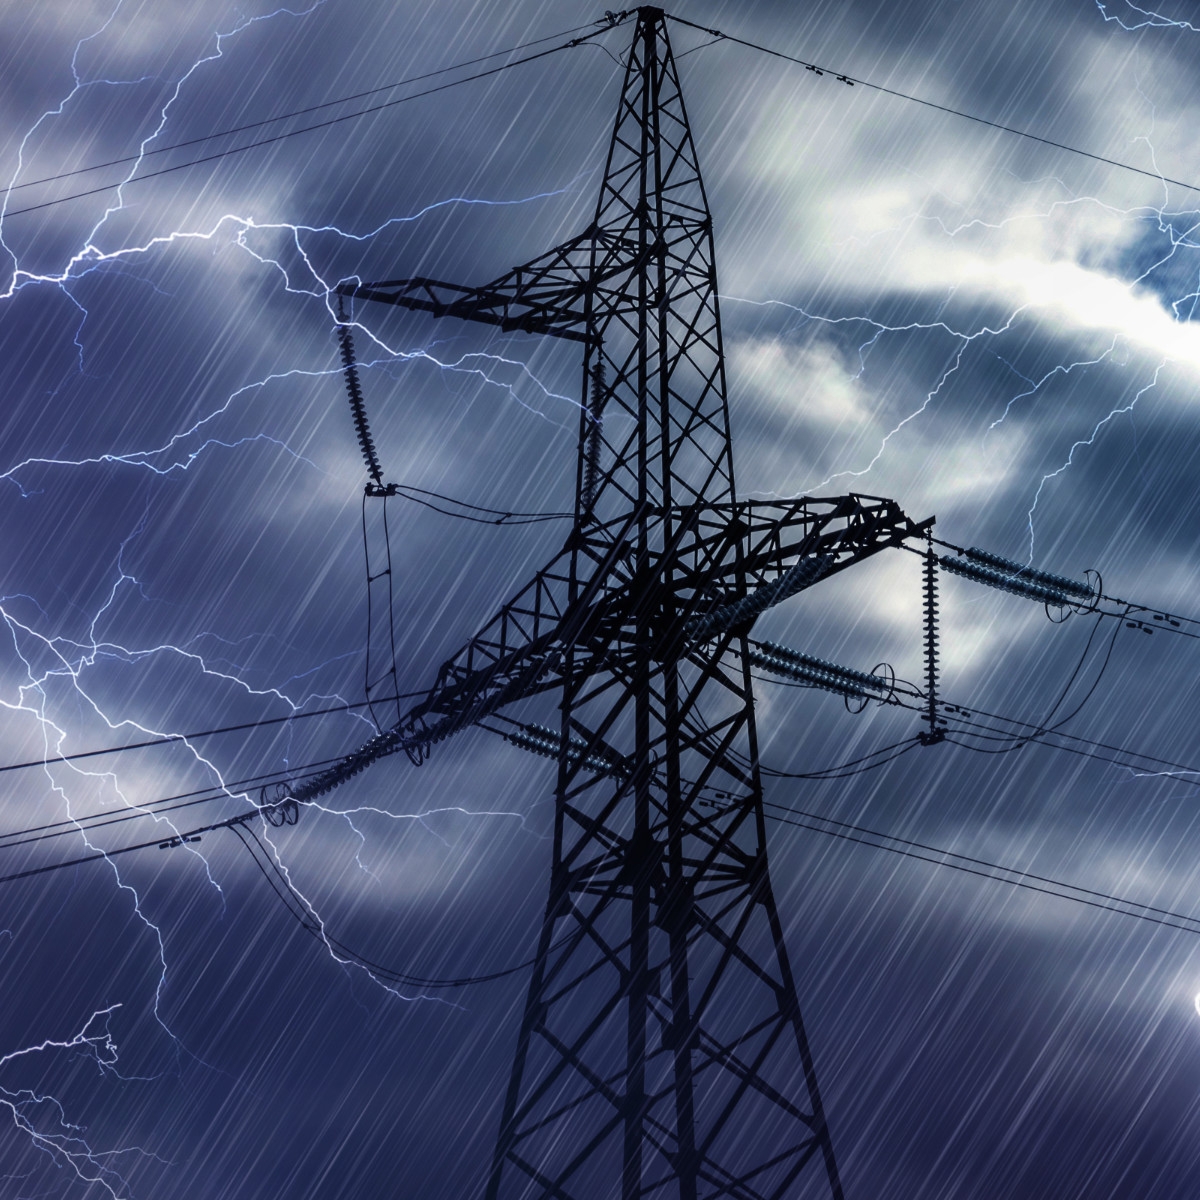 High voltage tower and lightning 
Article [9]: Public Safety Power Shutoff
Adobe Stock FILE #:  78606051 Powerplants
[Card Article [9] 1:1]